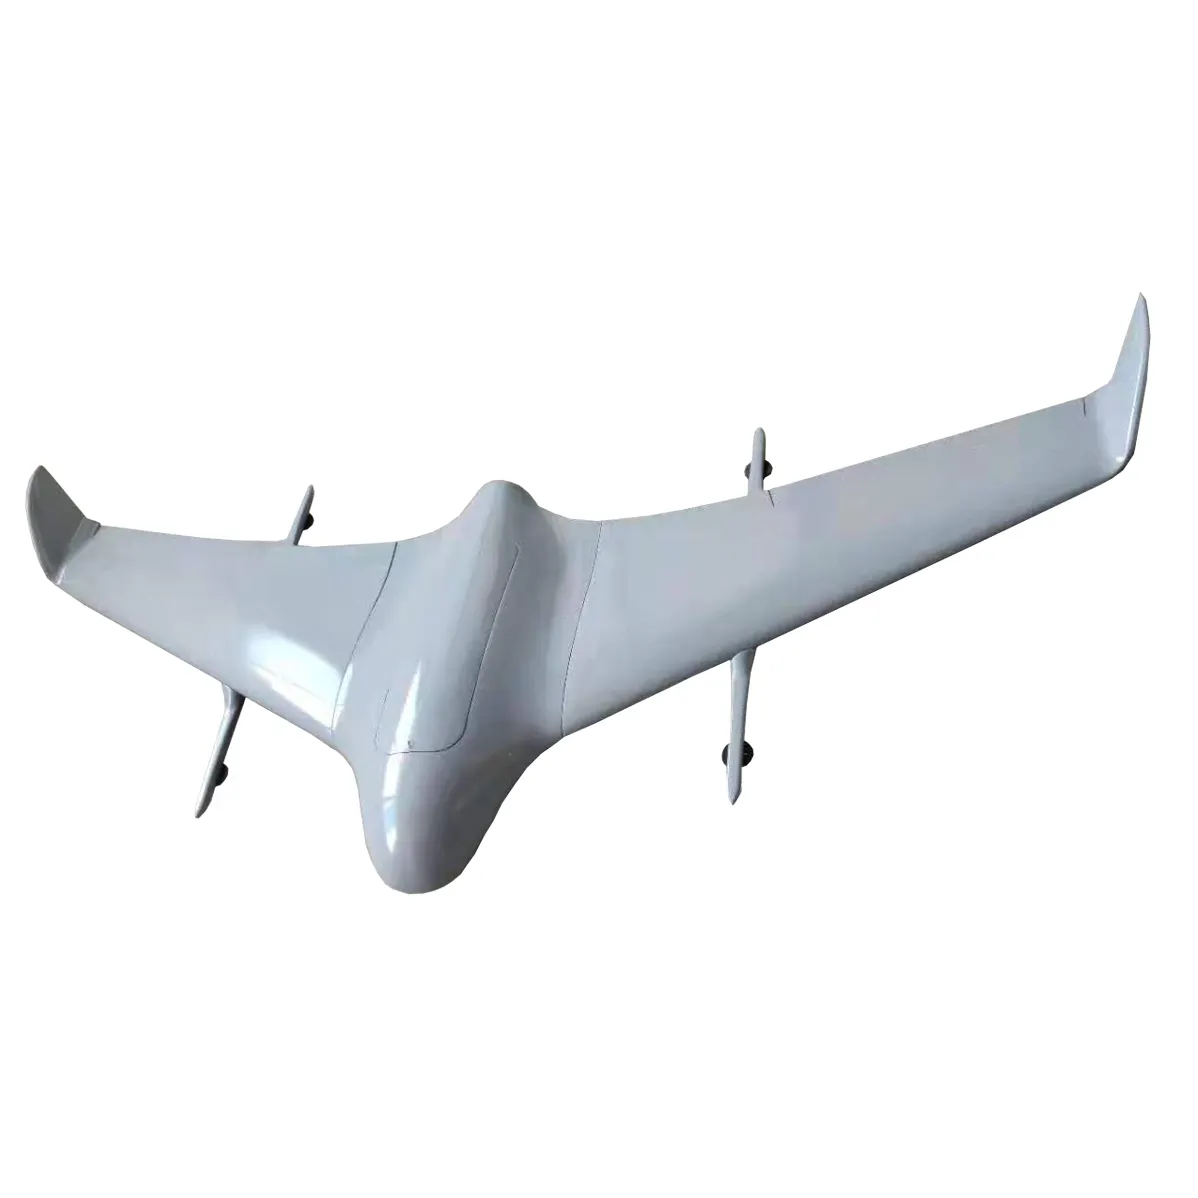 Long Range Fixed Wing Electric uav Inspect Surveying 3d Mapping Vtol Drone Industrial fixed wing with catapult option wing span